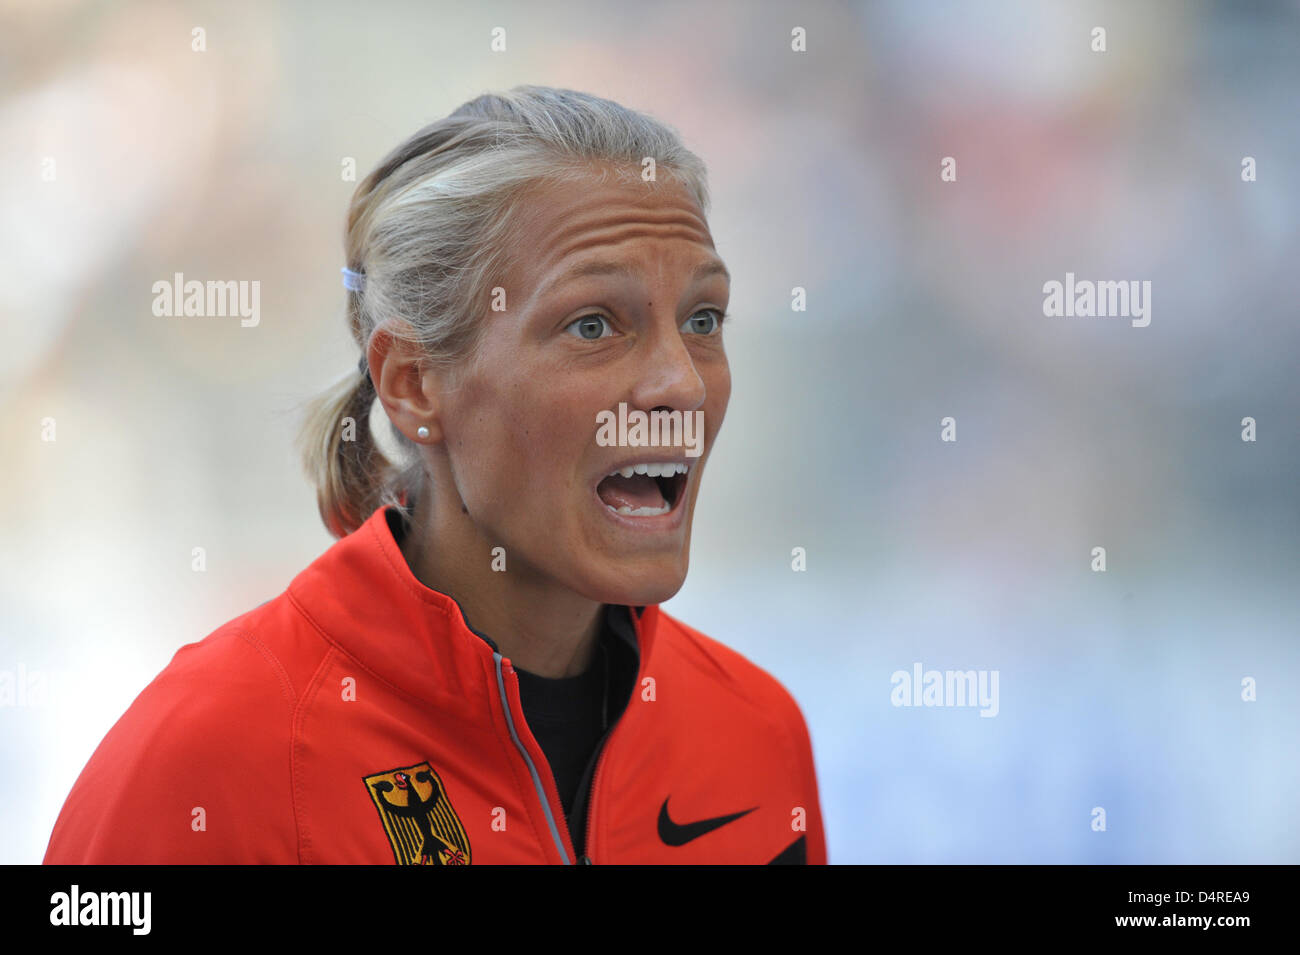 Germany?s Jennifer Oeser yells during the Heptathlon at the 12th IAAF World Championships in Athletics in Berlin, Germany, 15 August 2009. Photo: Bernd Thissen Stock Photo